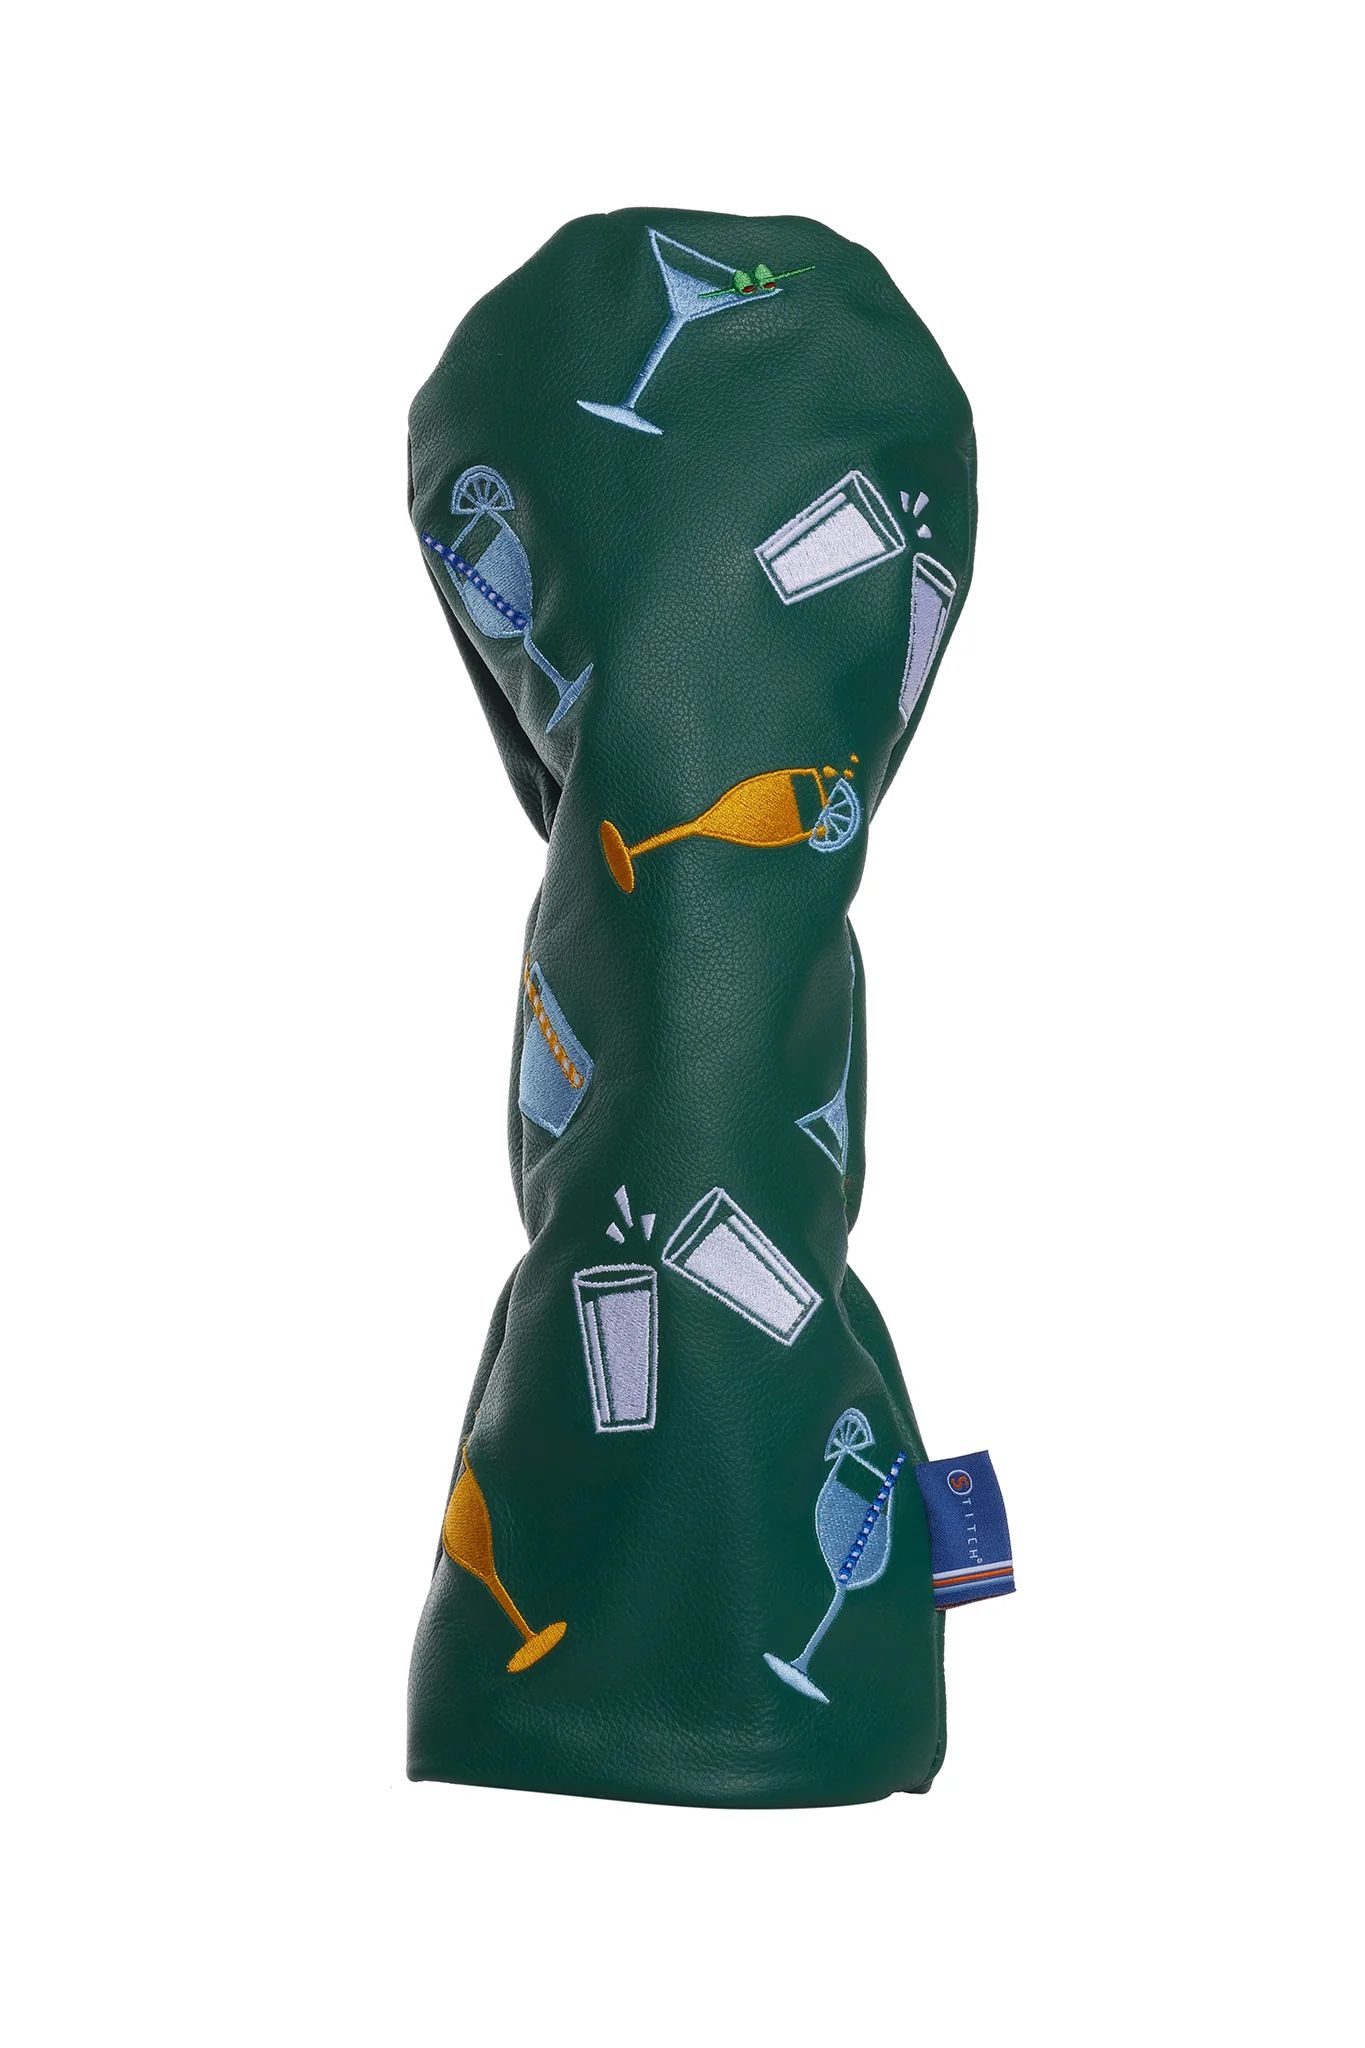 Limited Edition 19th Hole Headcover | STITCH Golf